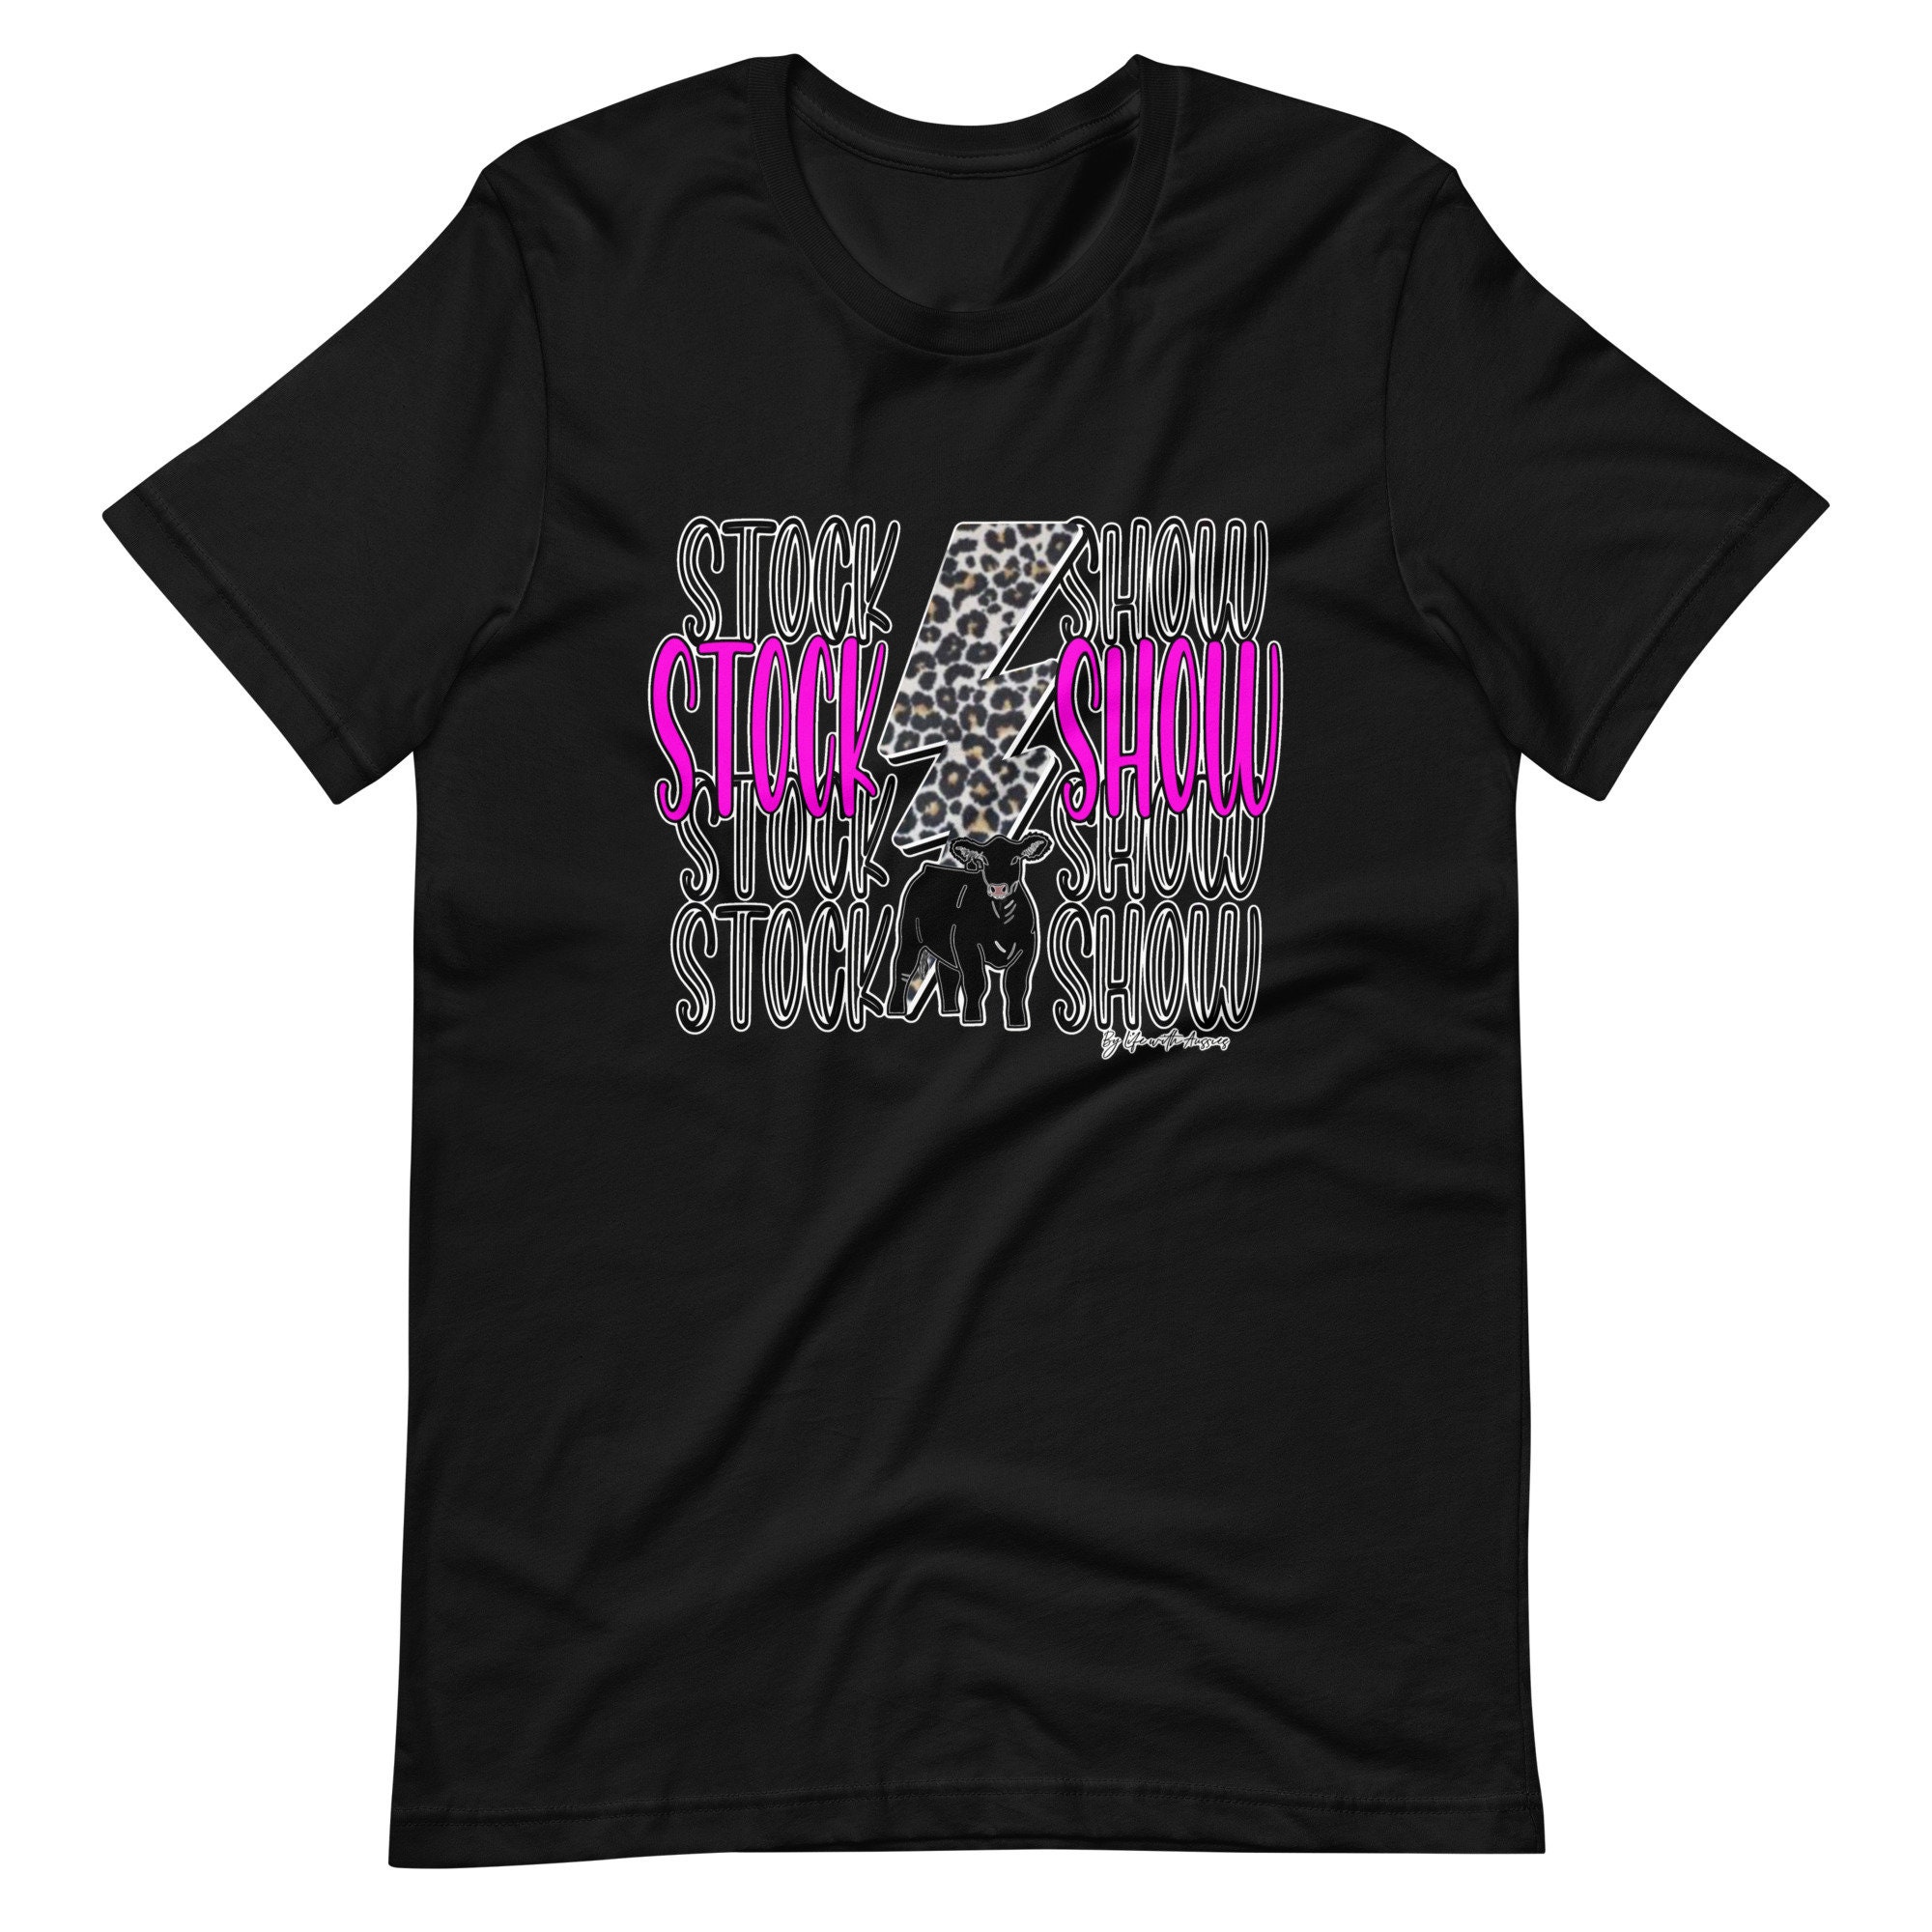 Stock Show Unisex T-shirt, Show Cattle, Showing Livestock, Show Mom ...